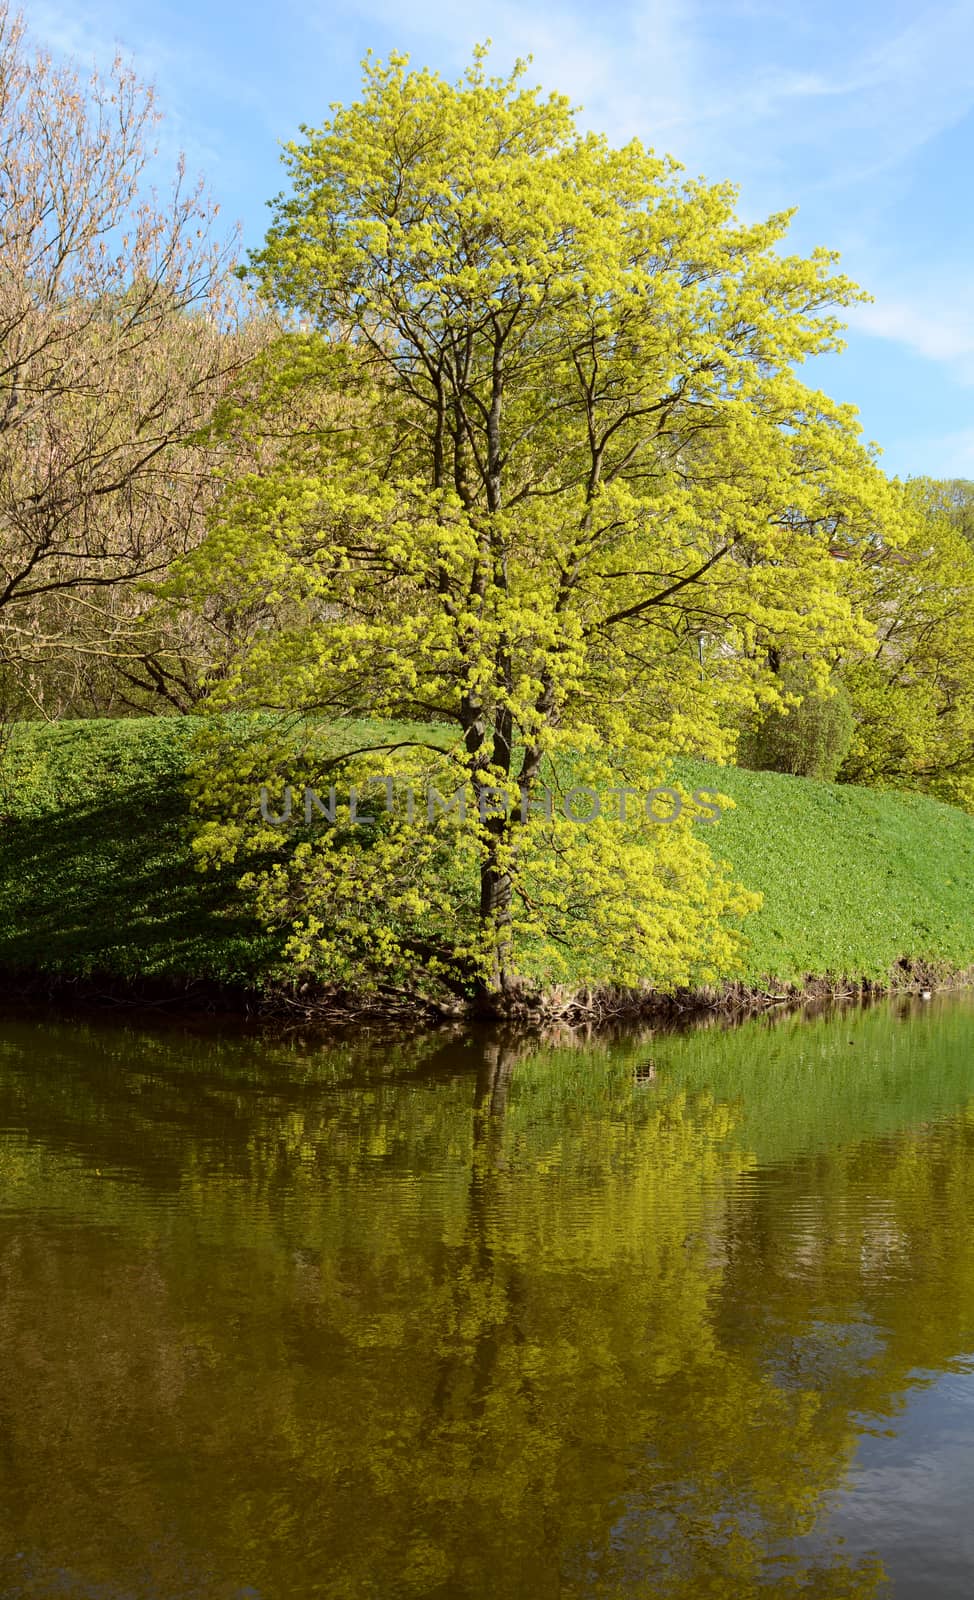 Tall tree with new lush green foliage is reflected in a pond below in Tallinn, Estonia on a bright spring day